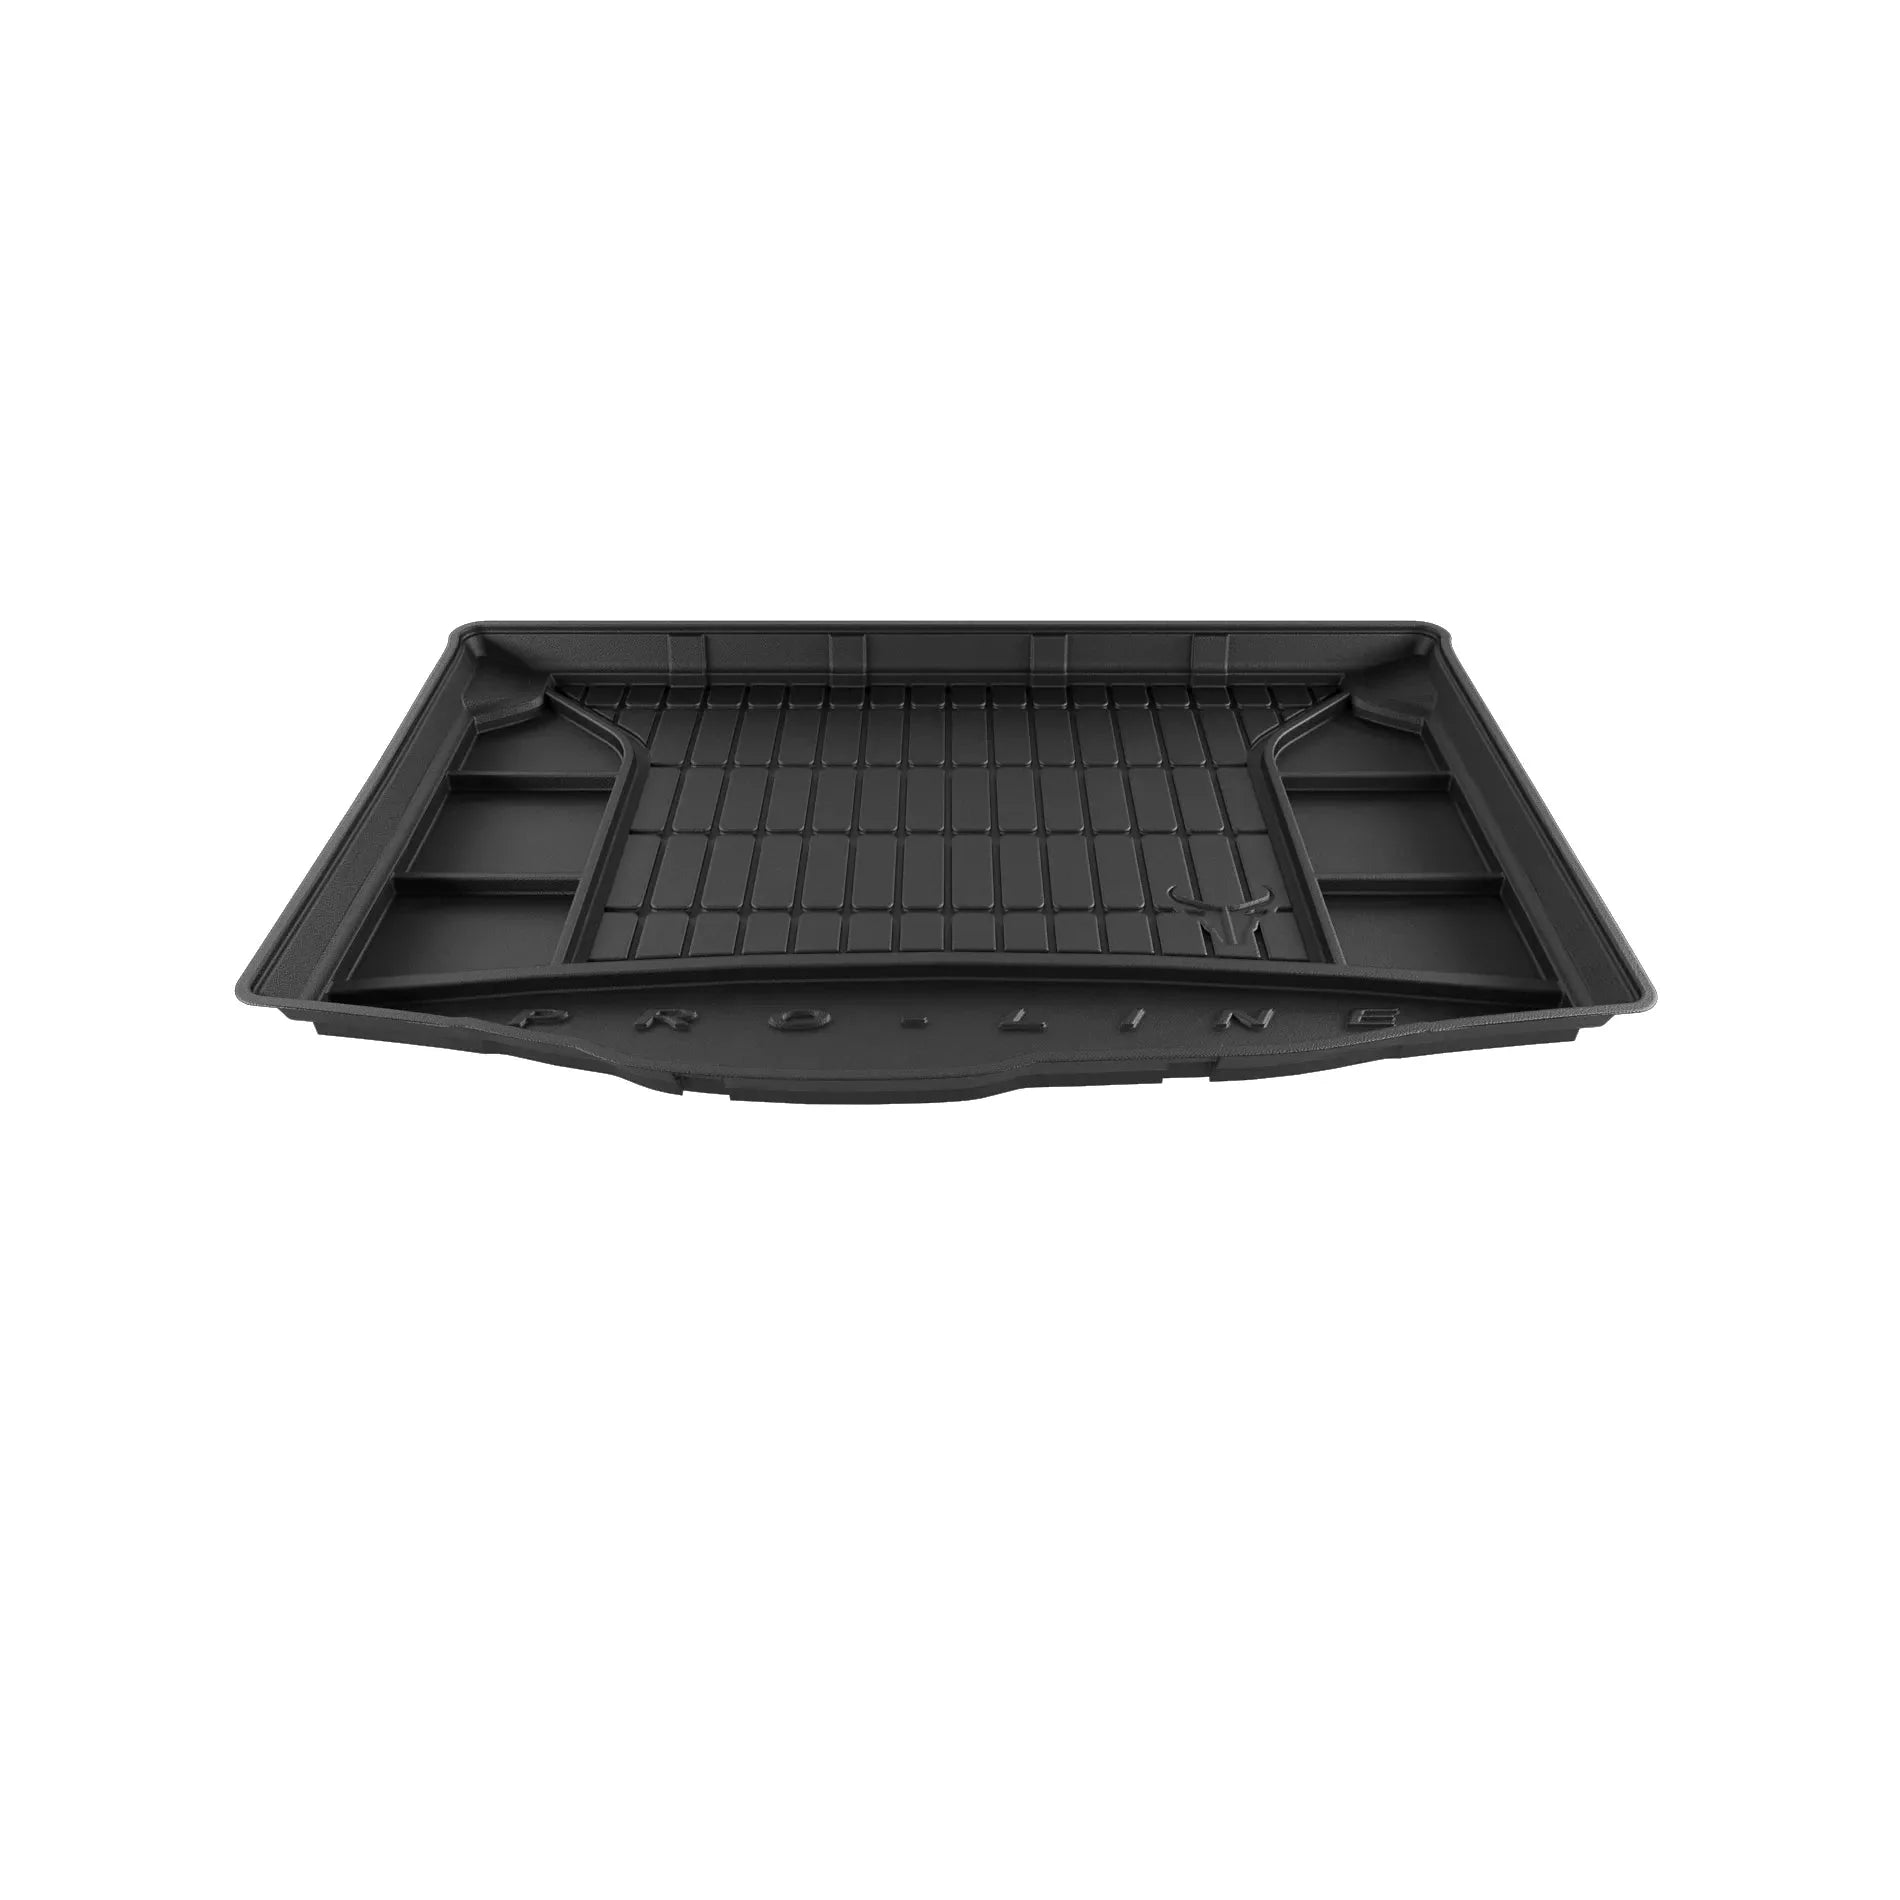 Tailored Car Boot Liner for Mazda - Protect Your Boot from Dirt and Damage - Green Flag vGroup